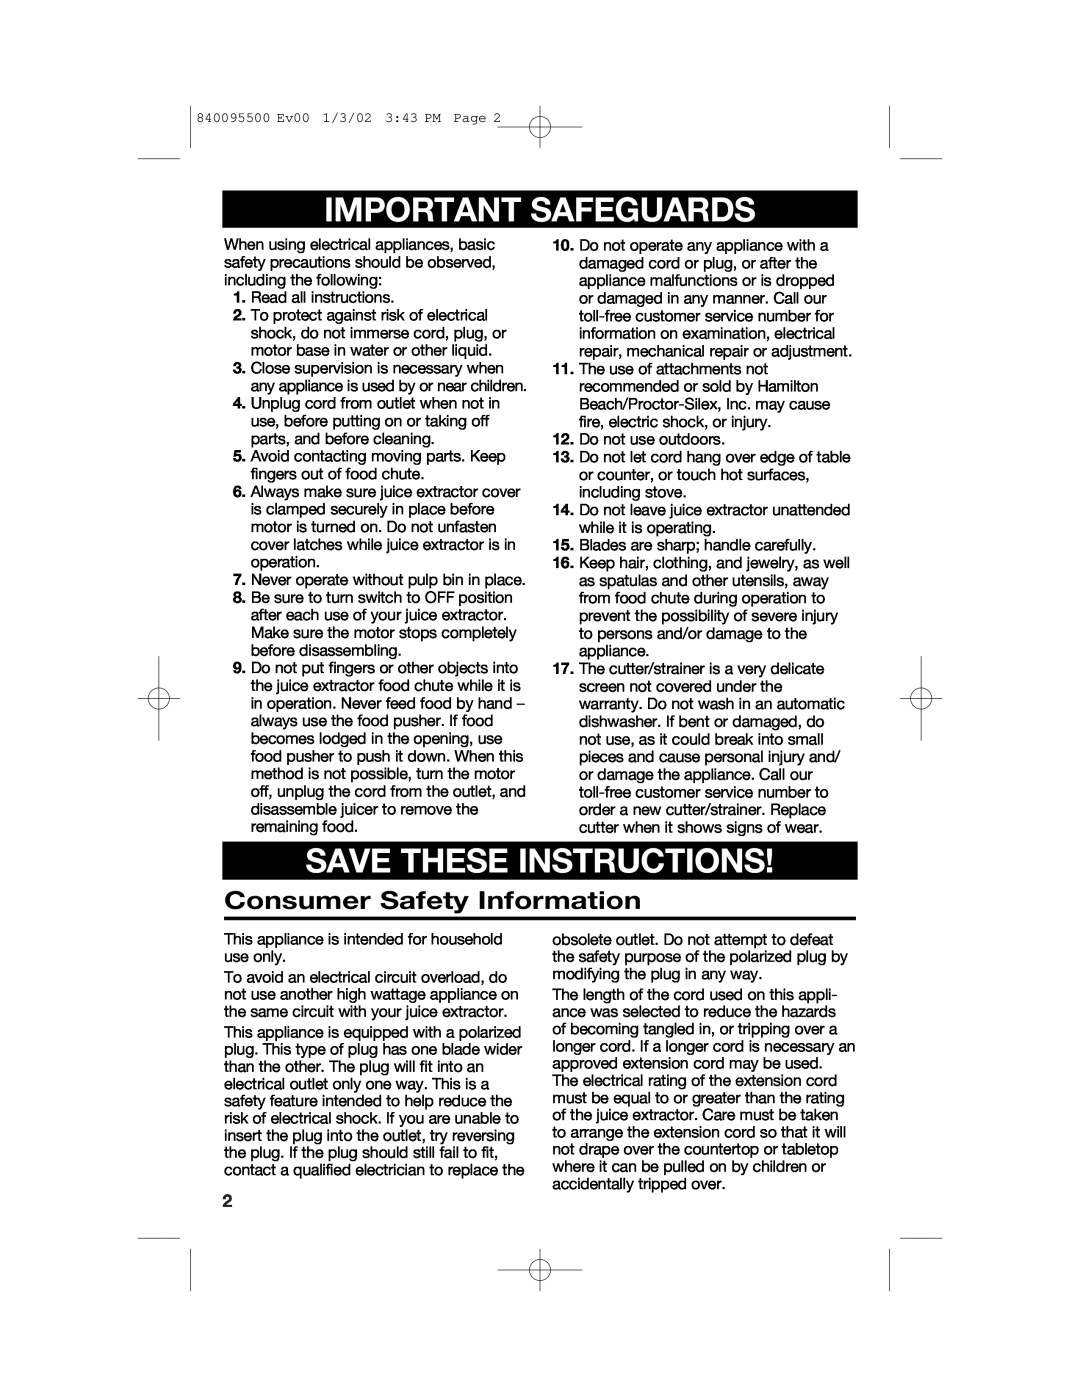 Hamilton Beach 840095500 manual Important Safeguards, Save These Instructions, Consumer Safety Information 